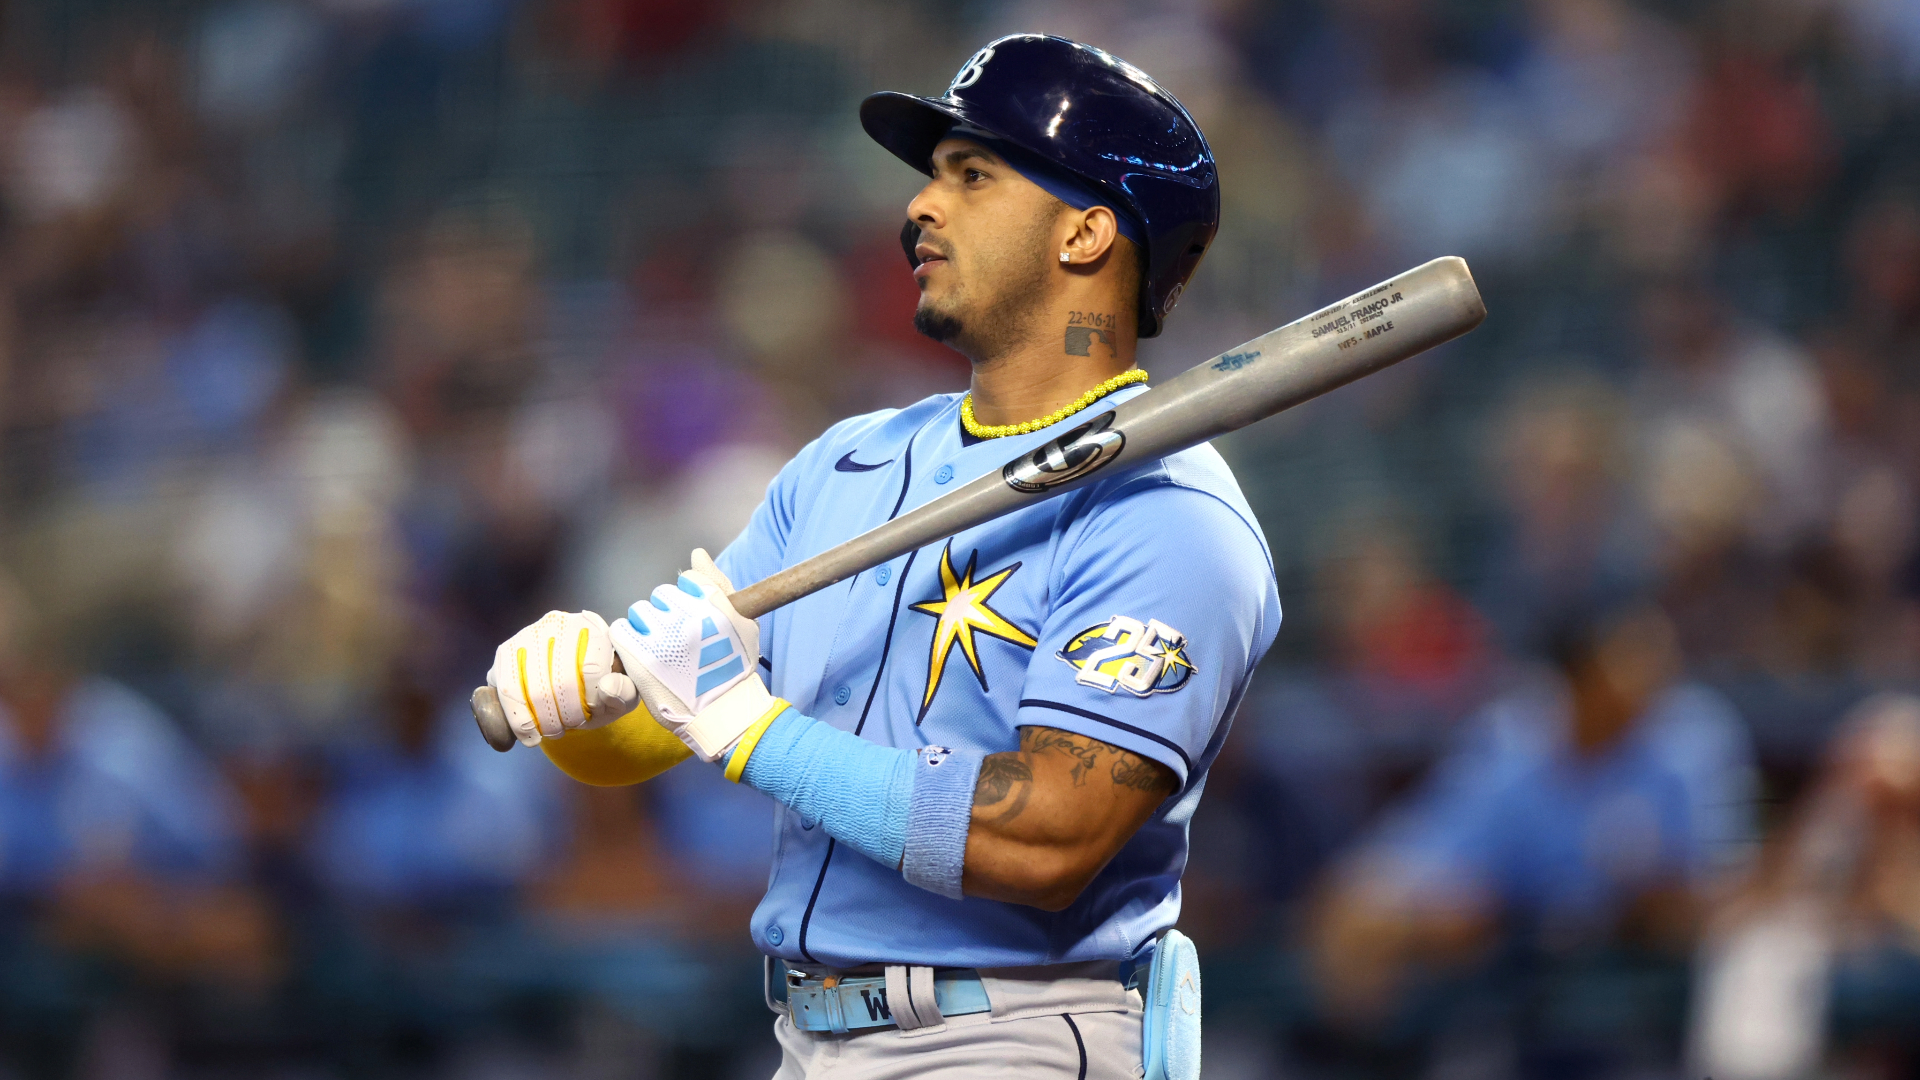 Wander Franco Rumors: Rays Star Investigated For Second Complaint